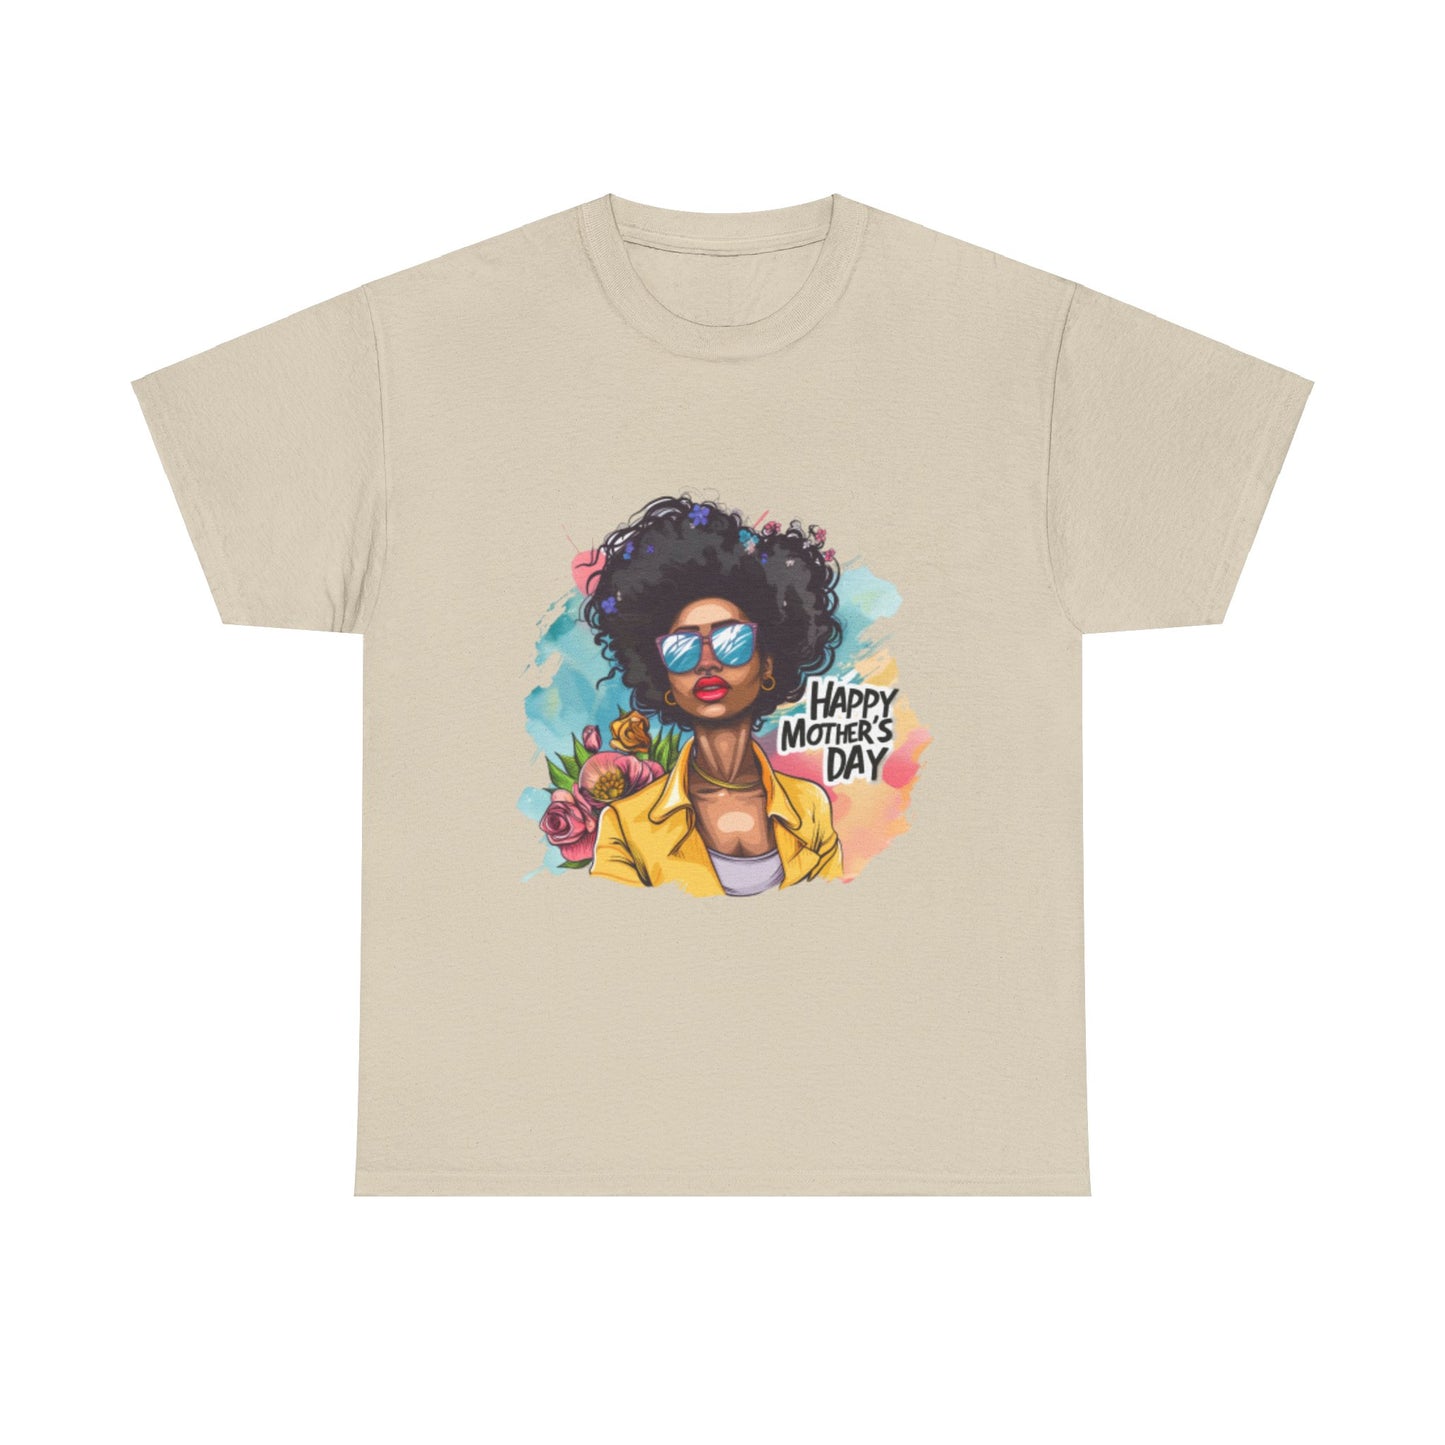 Happy Mother's Day African American Mom Graphic Unisex Heavy Cotton Tee Cotton Funny Humorous Graphic Soft Premium Unisex Men Women Sand T-shirt Birthday Gift-8